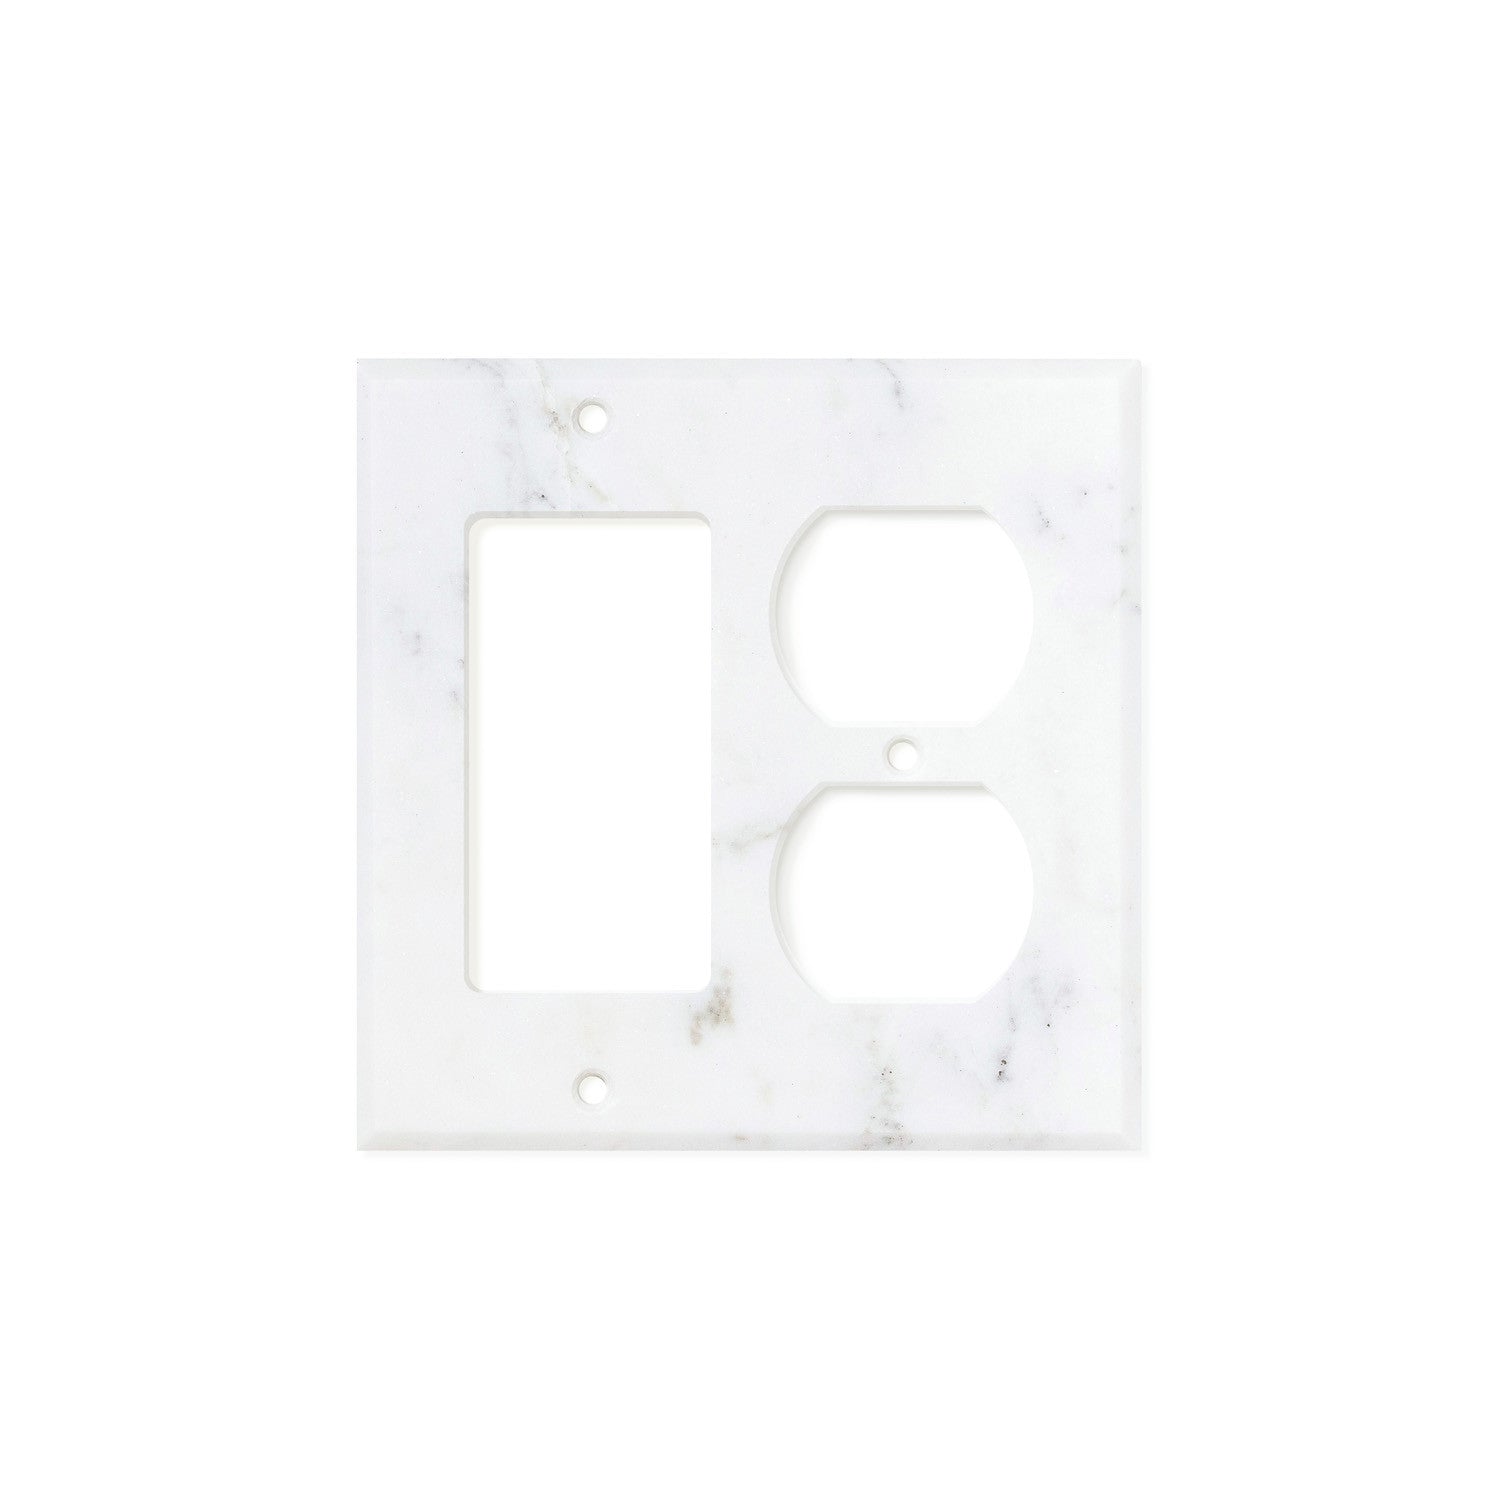 Calacatta Gold Marble Switch Plate Cover, Polished (ROCKER DUPLEX) - Tilephile